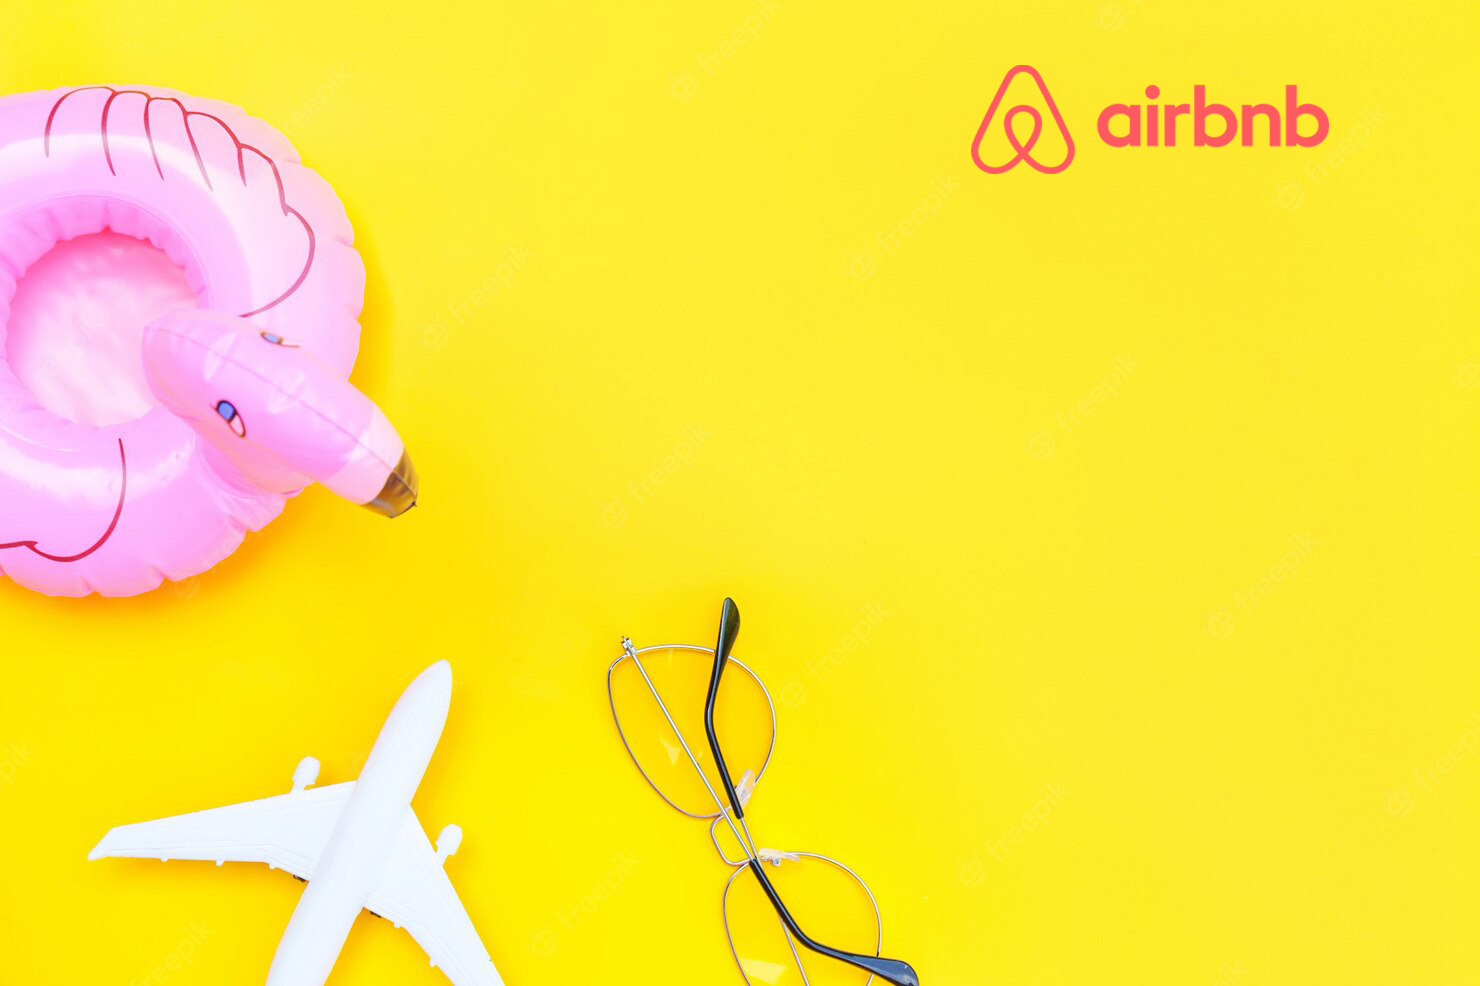 Airbnb is a vacation renting service.